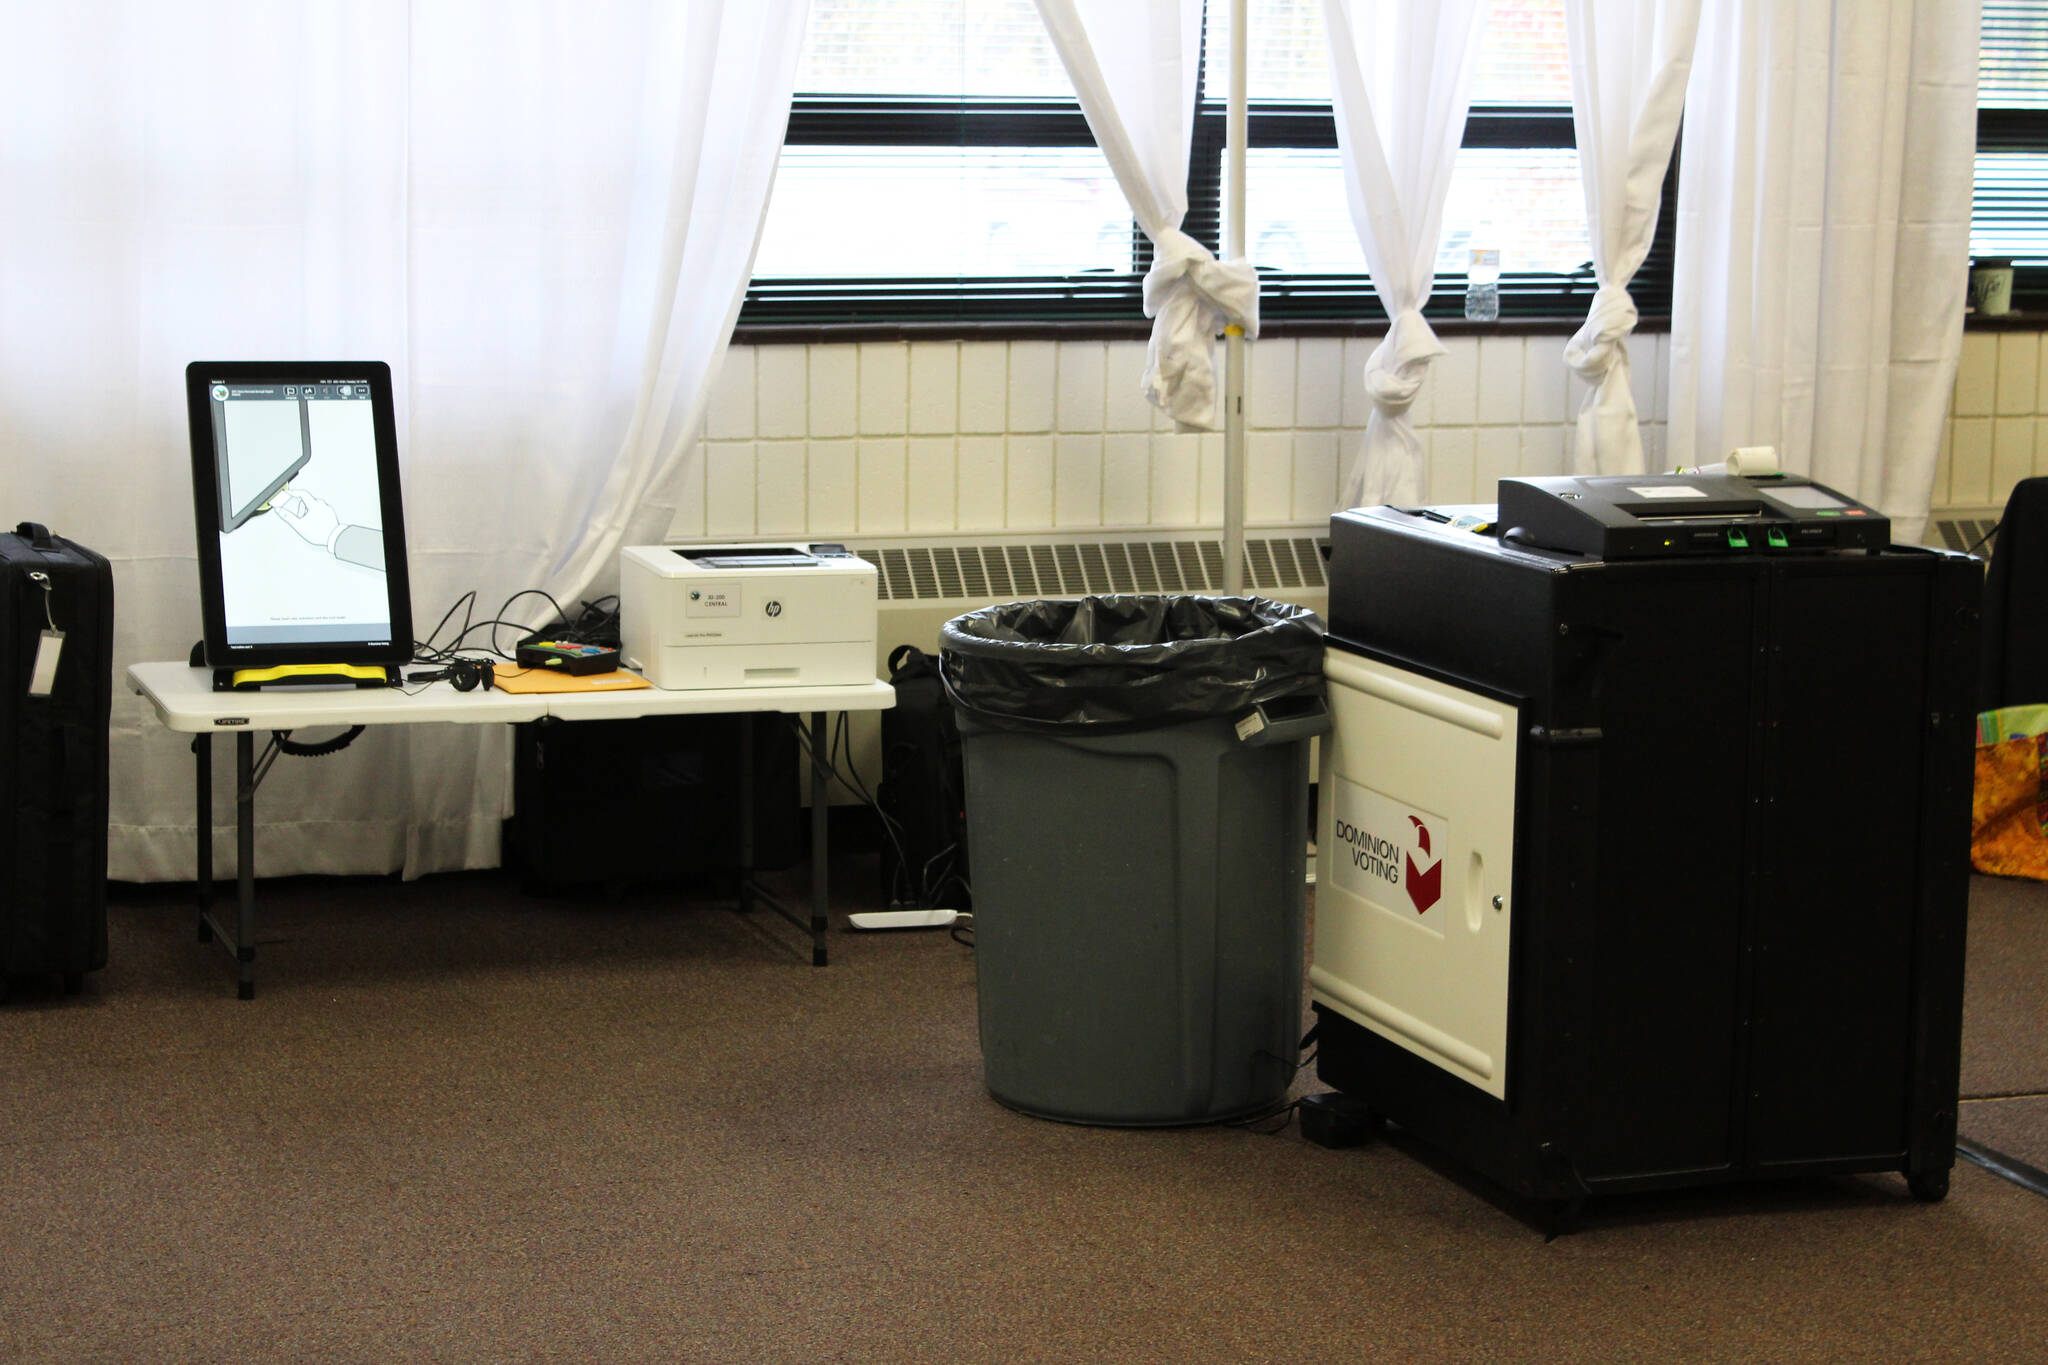 Voting equipment is set up at a polling location at the Soldotna Regional Sports Complex on Tuesday, Oct. 5, 2021 in Soldotna, Alaska. (Ashlyn O’Hara/Peninsula Clarion)